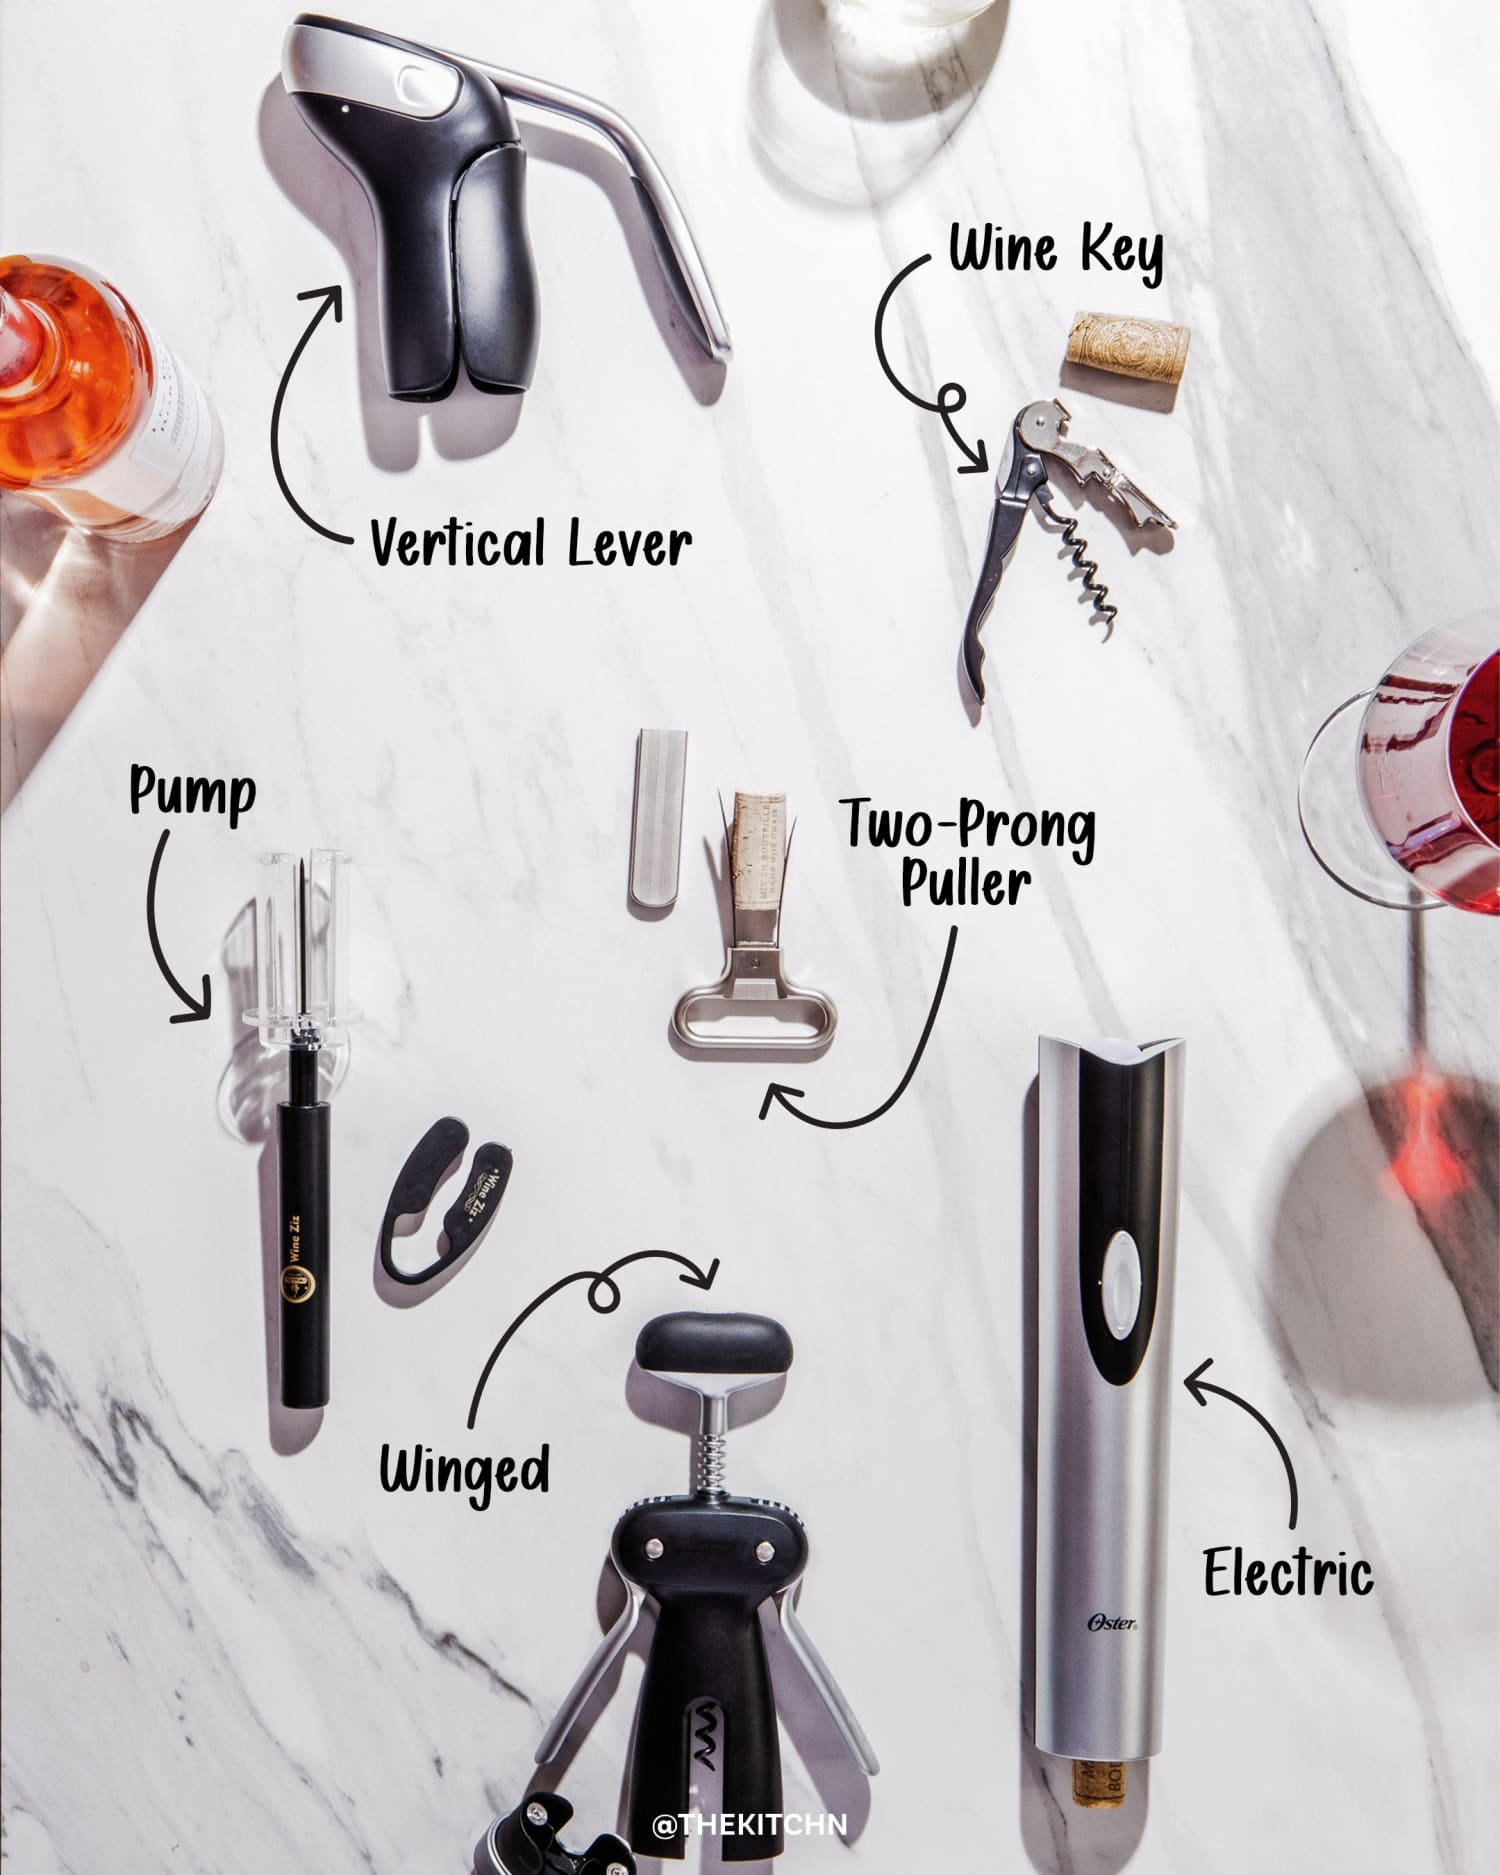 We Tried 6 Different Types of Wine Openers — And the Winner Isn’t the One You’d Think